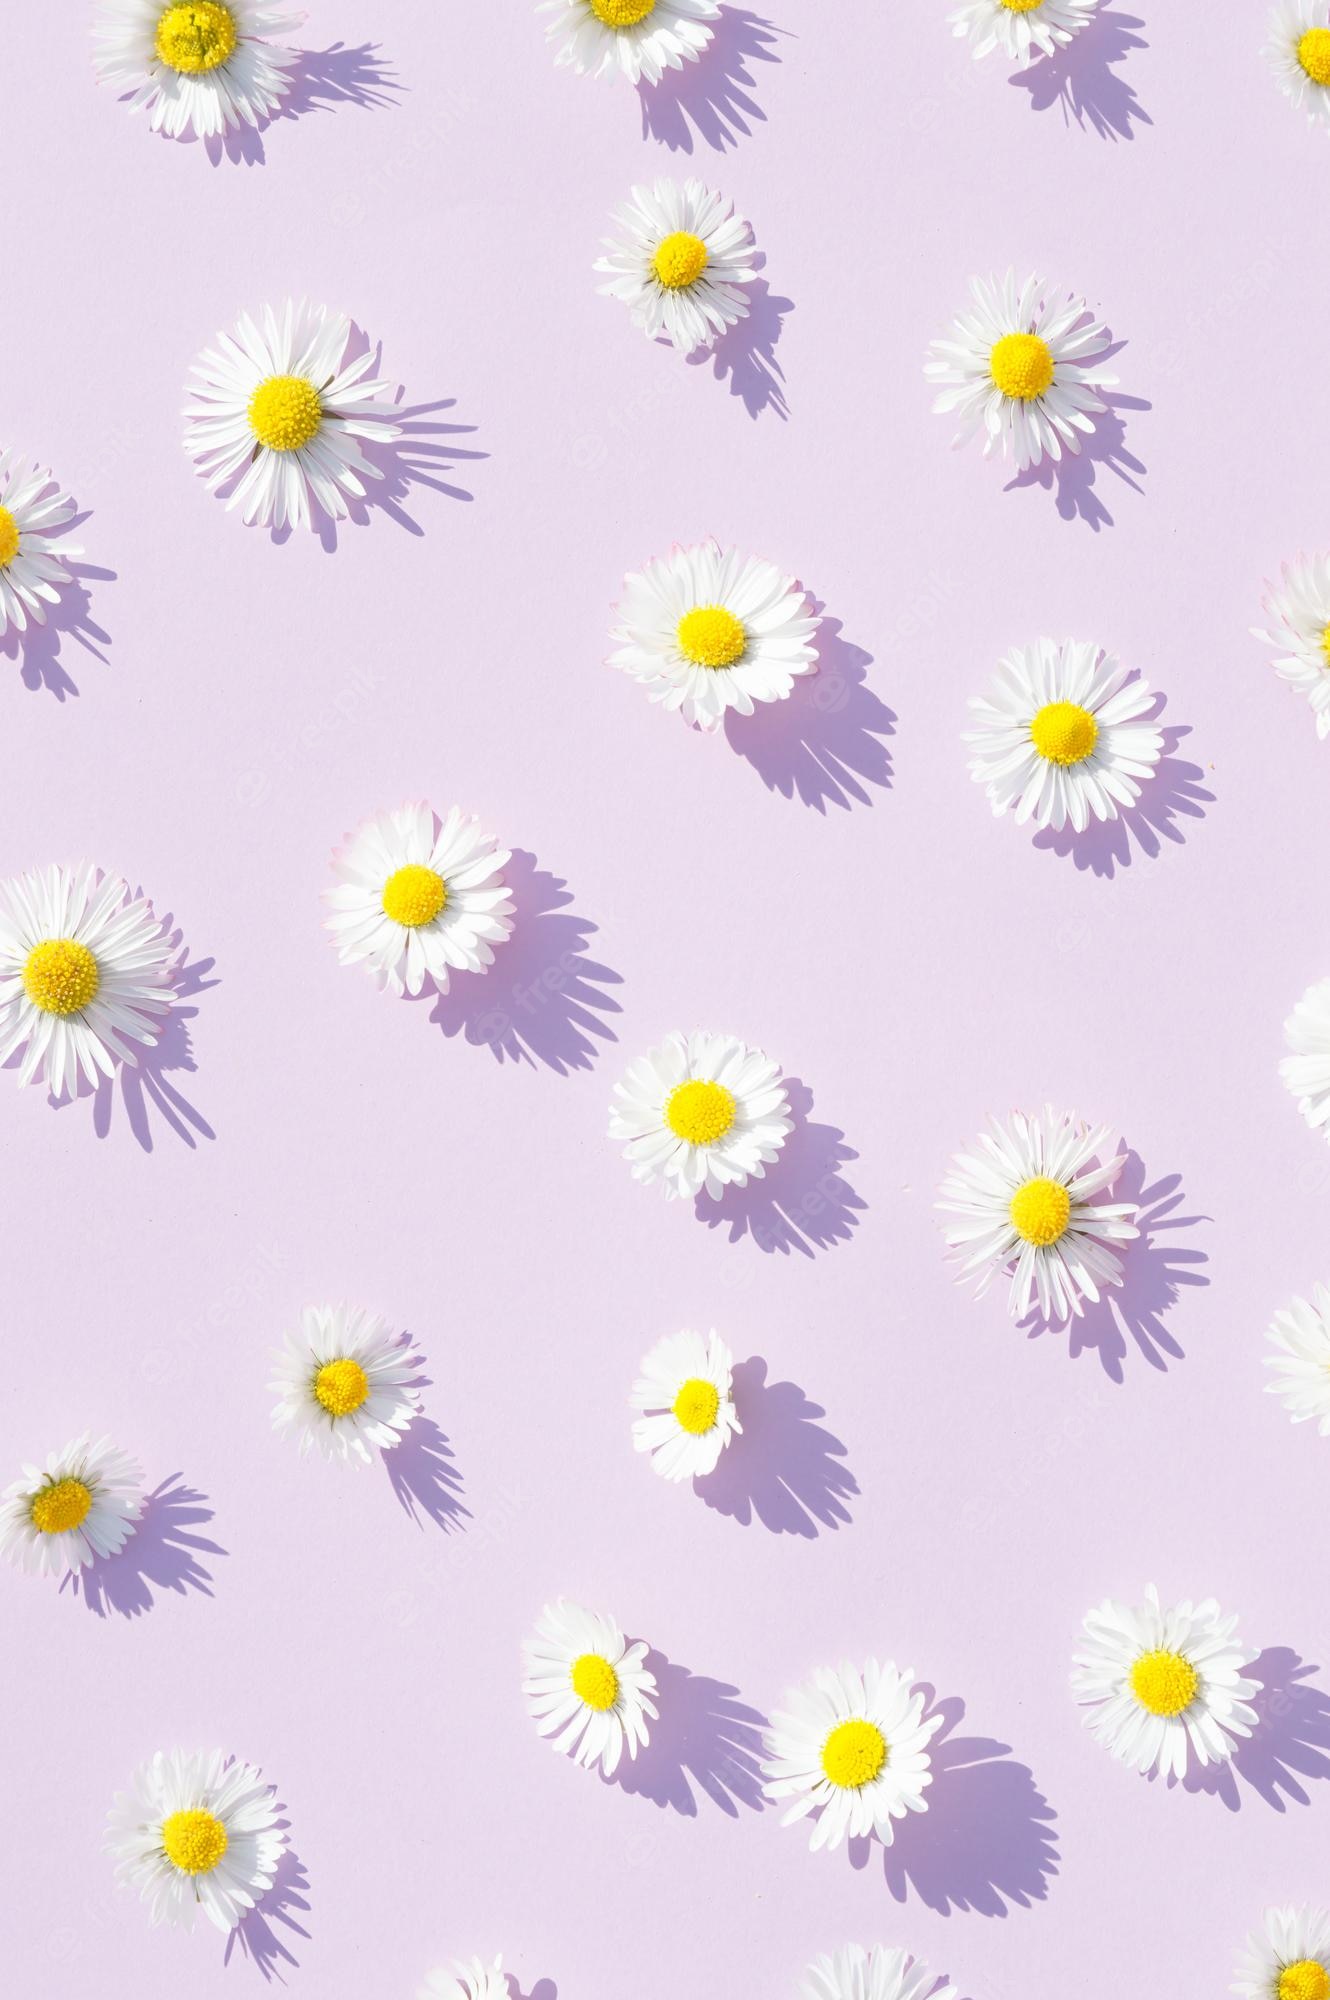 Cute Aesthetic Wallpaper Picture